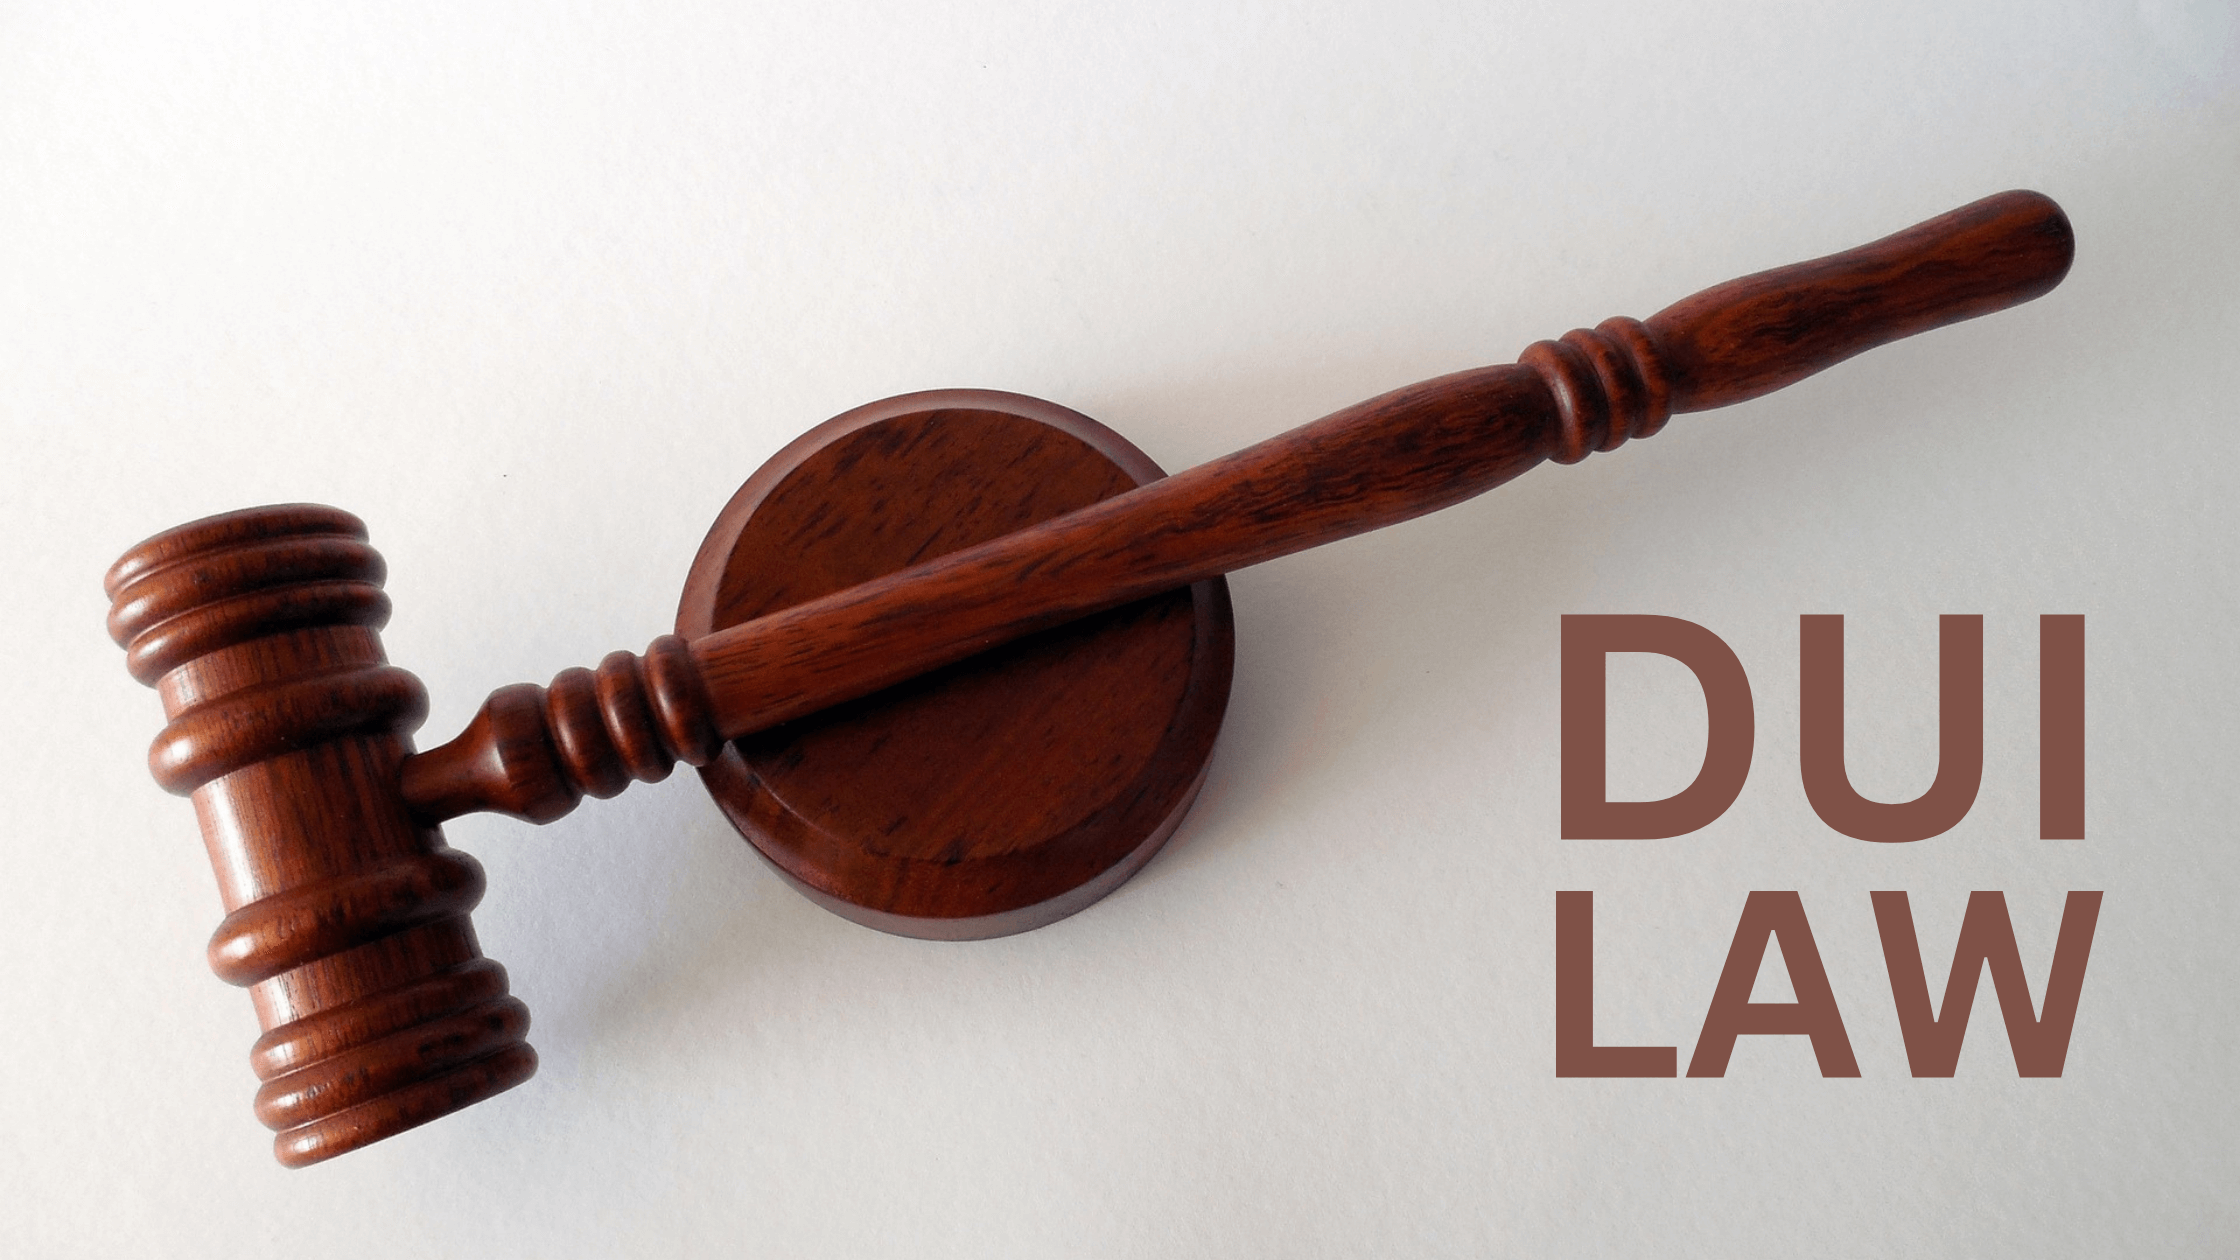 DUI law concept with a wooden gavel on a white background.